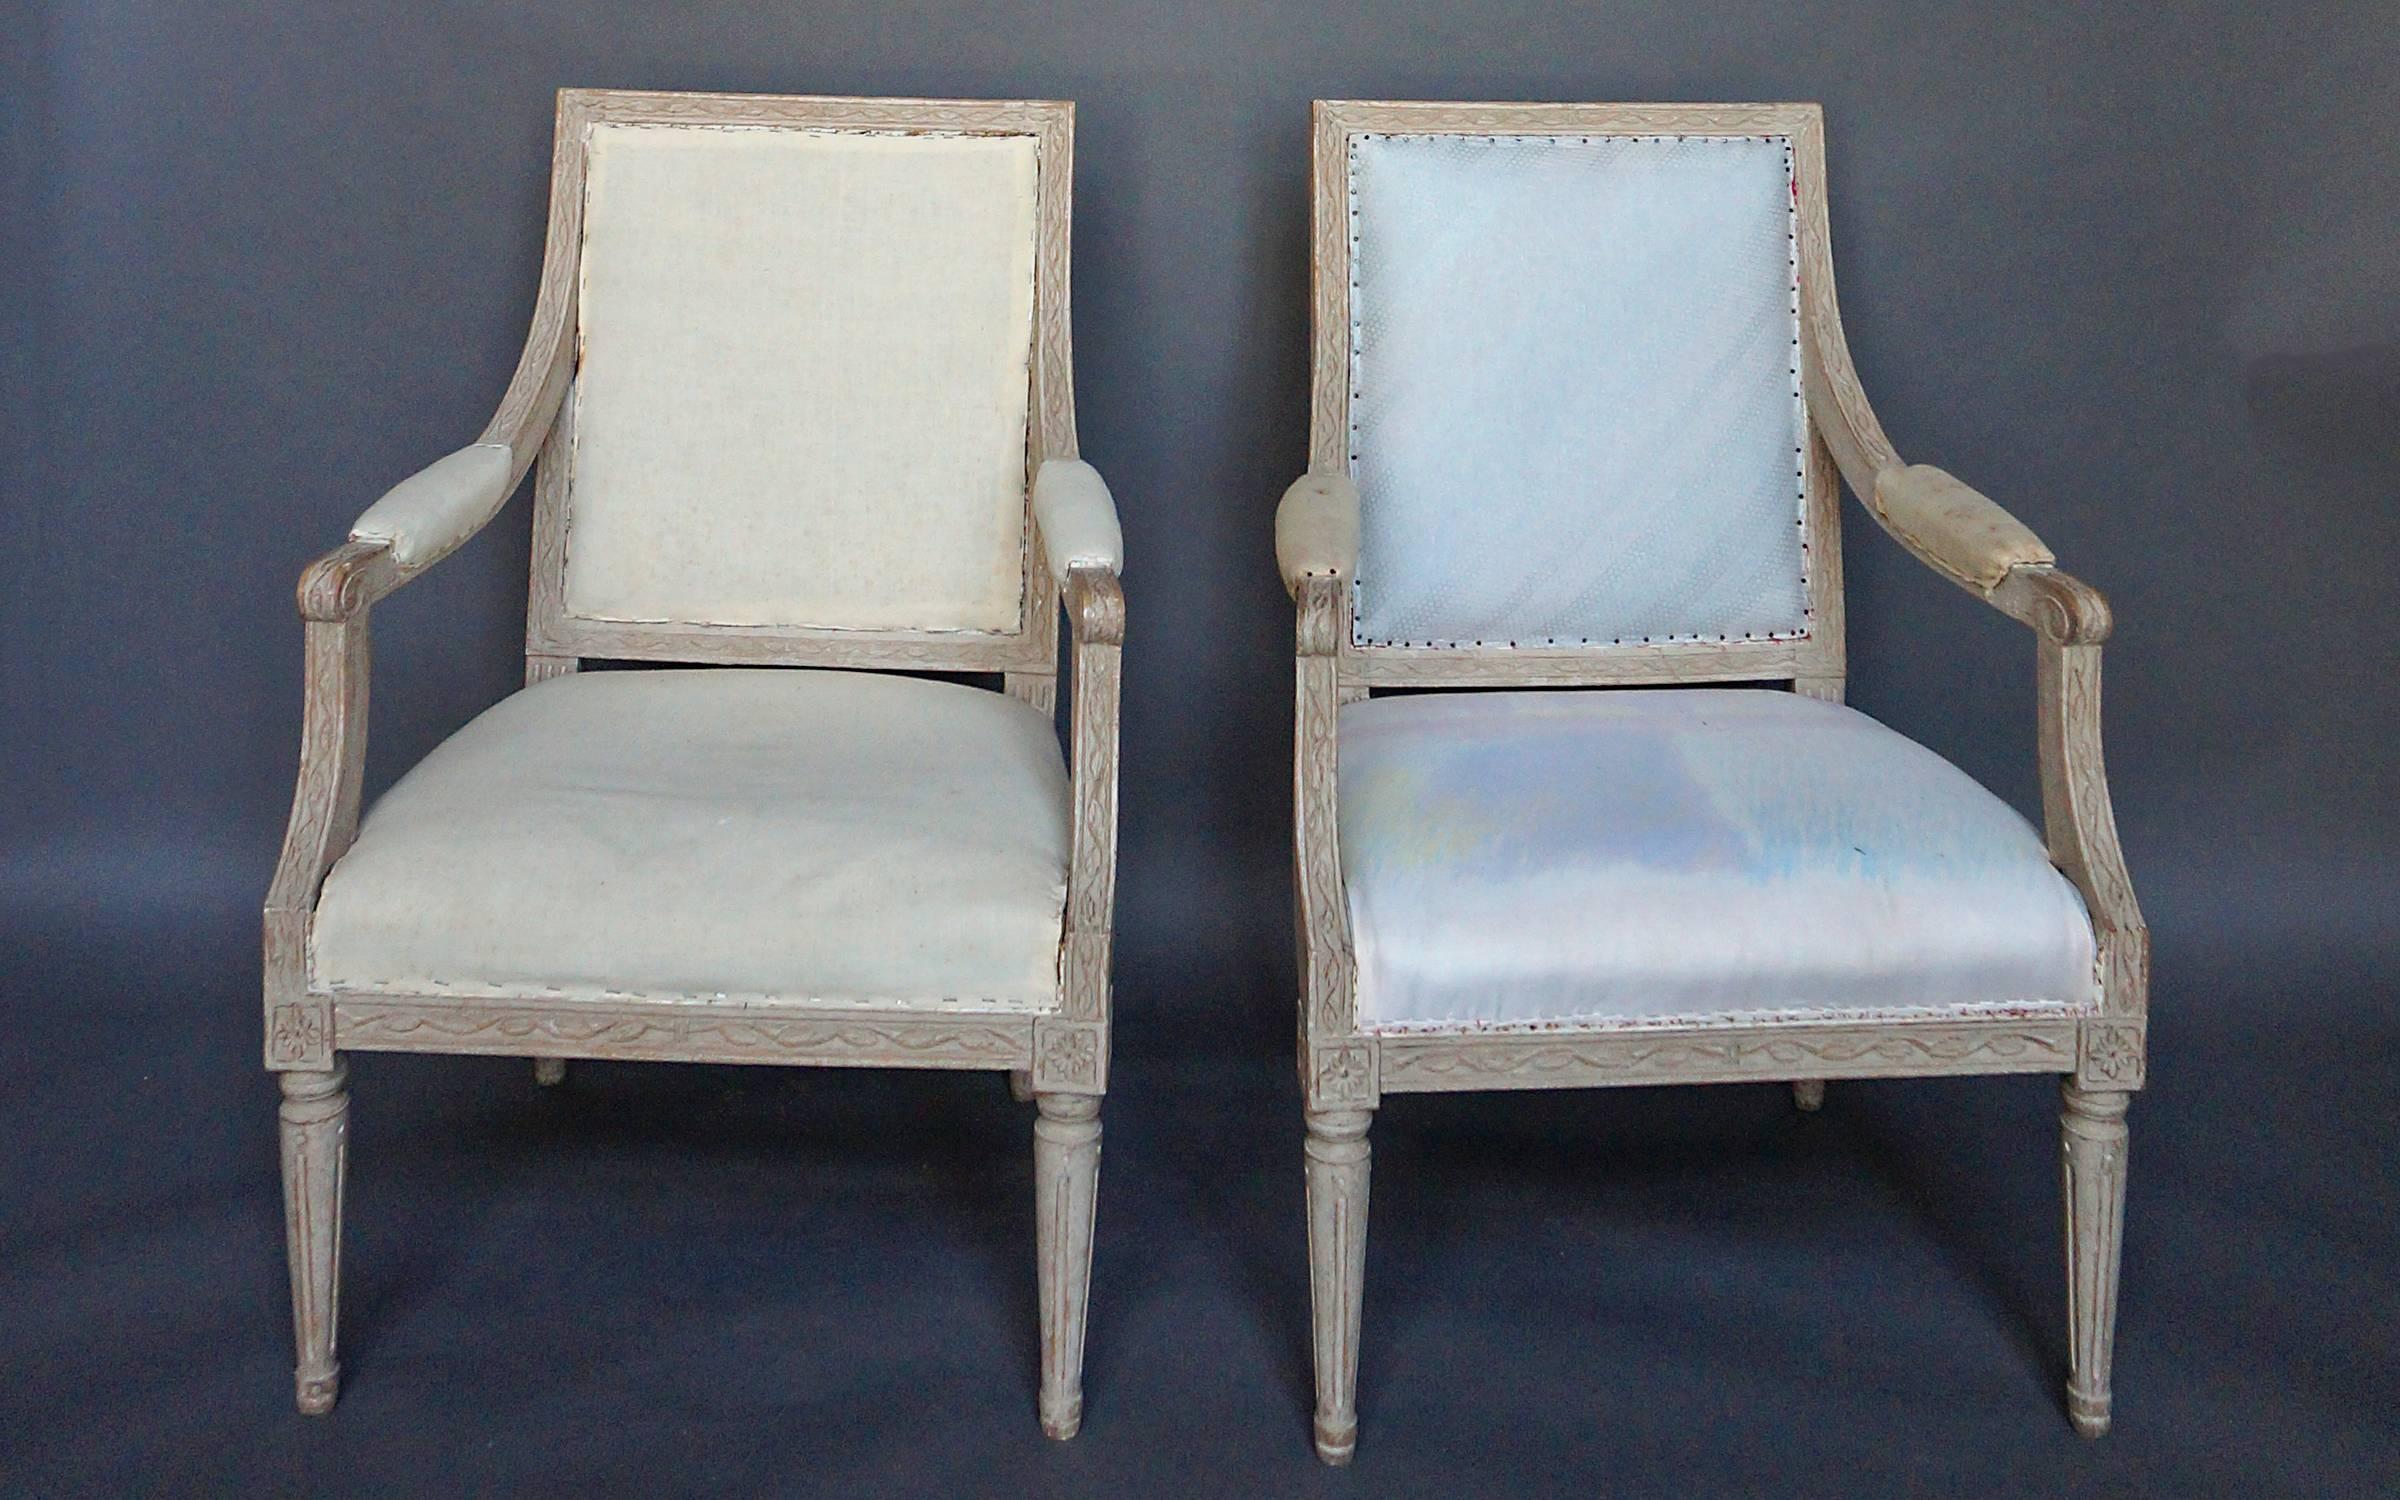 Pair of armchairs in the Gustavian style, Sweden, 1910. Exposed frame with graceful leaf and vine carving throughout. Upholstered seat, back and armrests.